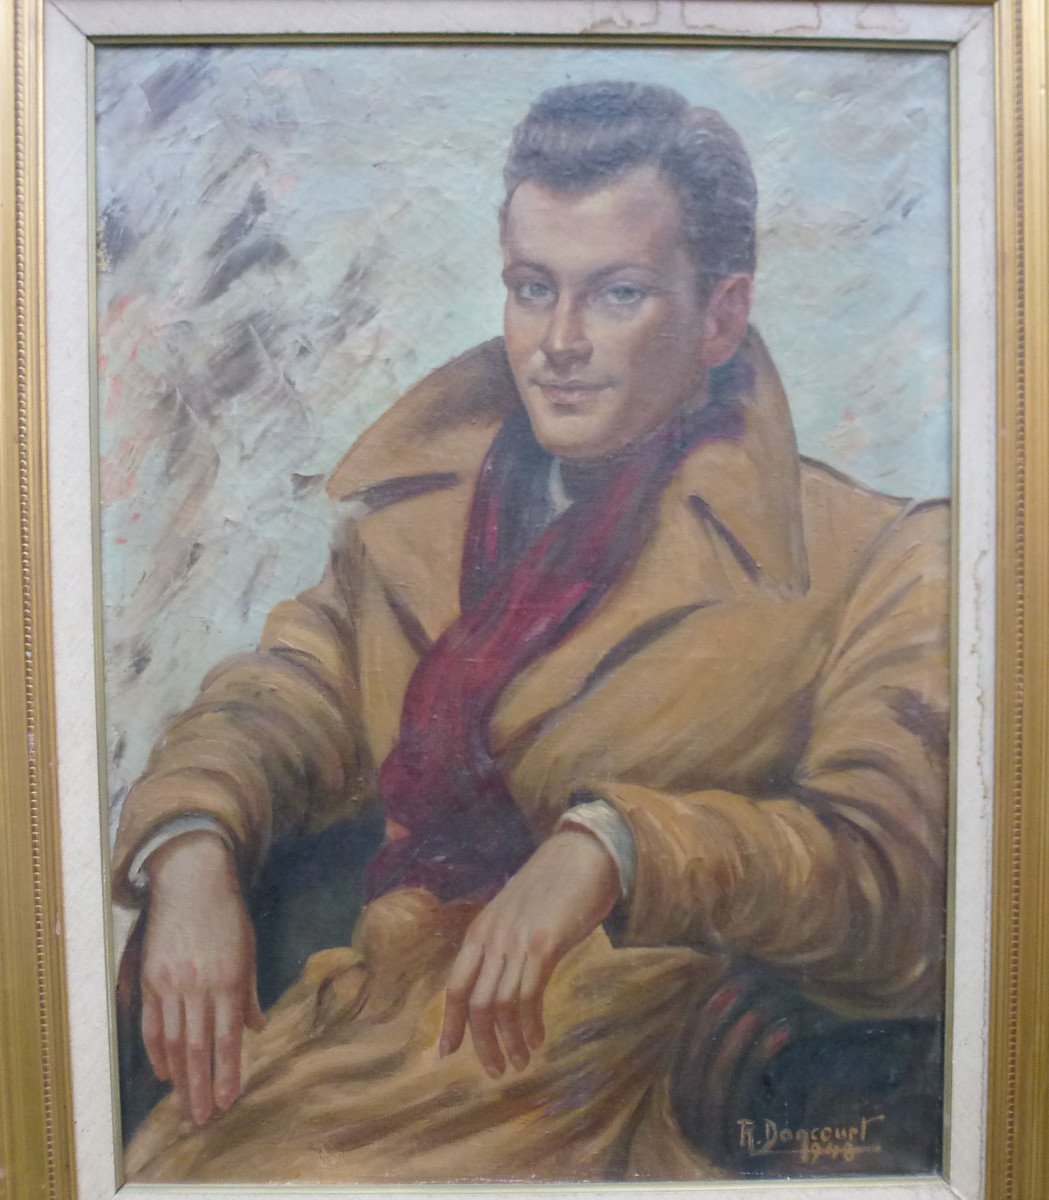 R. Dancourtportrait Of Man Oil On Canvas From The 20th Century Signed-photo-3